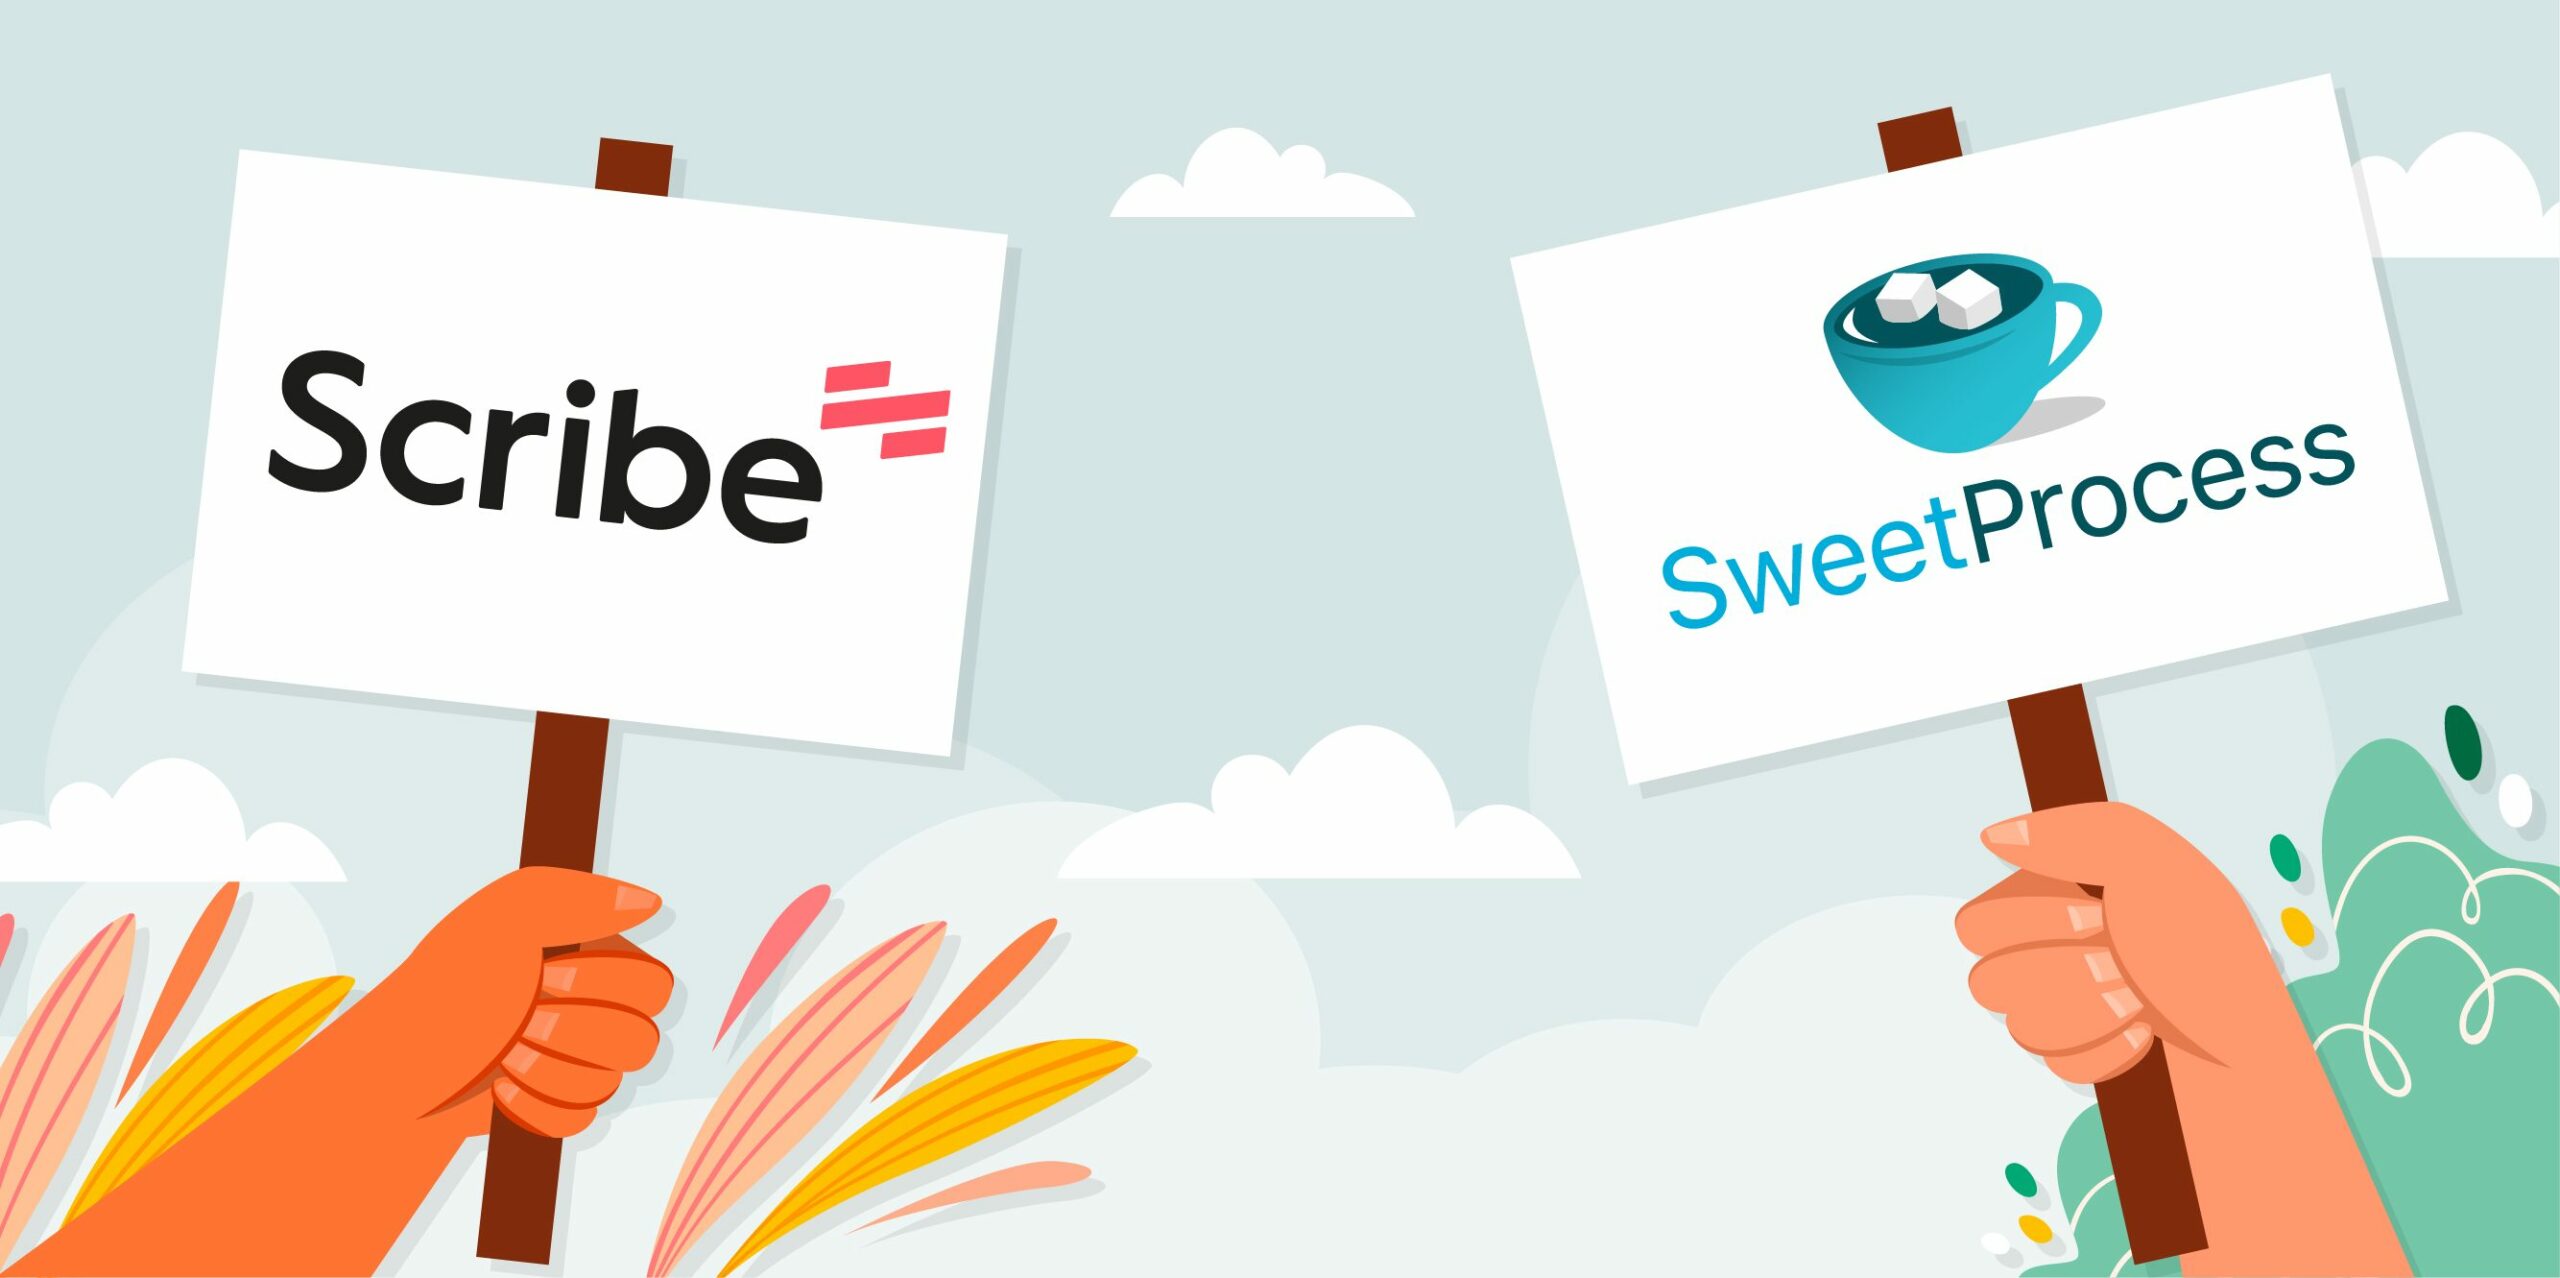 Scribe Chrome Extension Vs. SweetProcess Chrome Extension: Key Differences